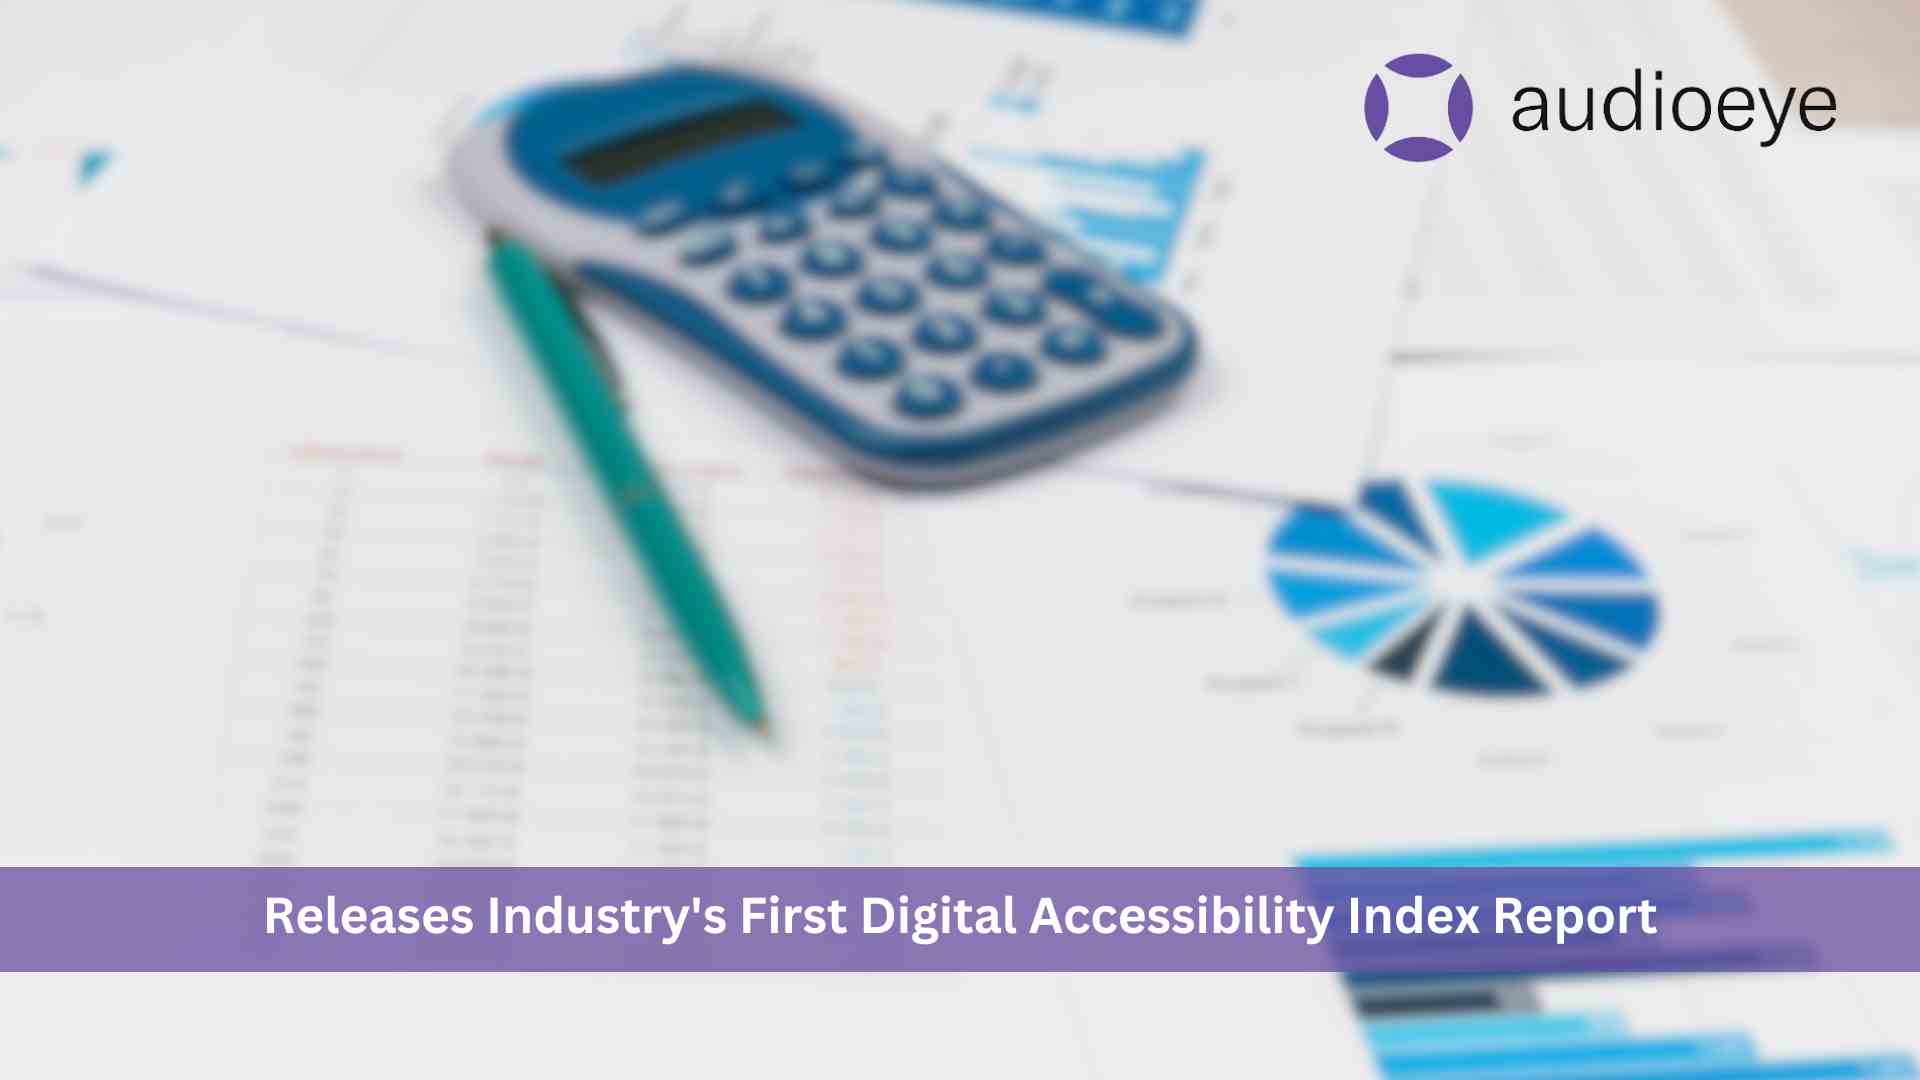 AudioEye Releases Industry's First Digital Accessibility Index Report, Shows Significant Roadblocks for People with Disabilities on Enterprise Websites